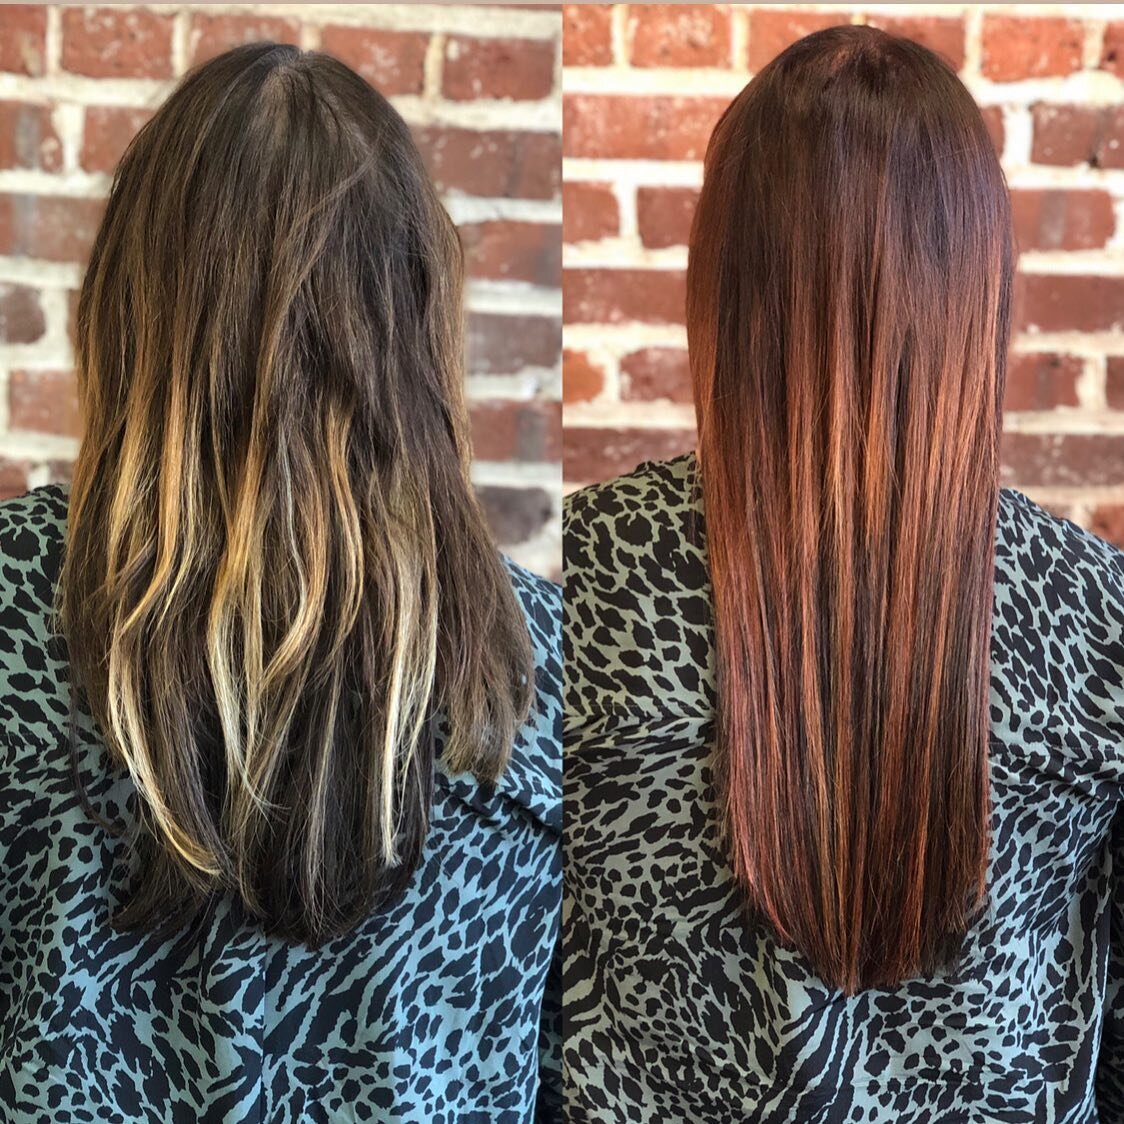 Here&rsquo;s some before and after action for ya. Wish I had taken a photo after I took out her tape ins to show the true density of the hair. Who here can attest to getting frazzled while doing work and trying to get that perfect before and after pi